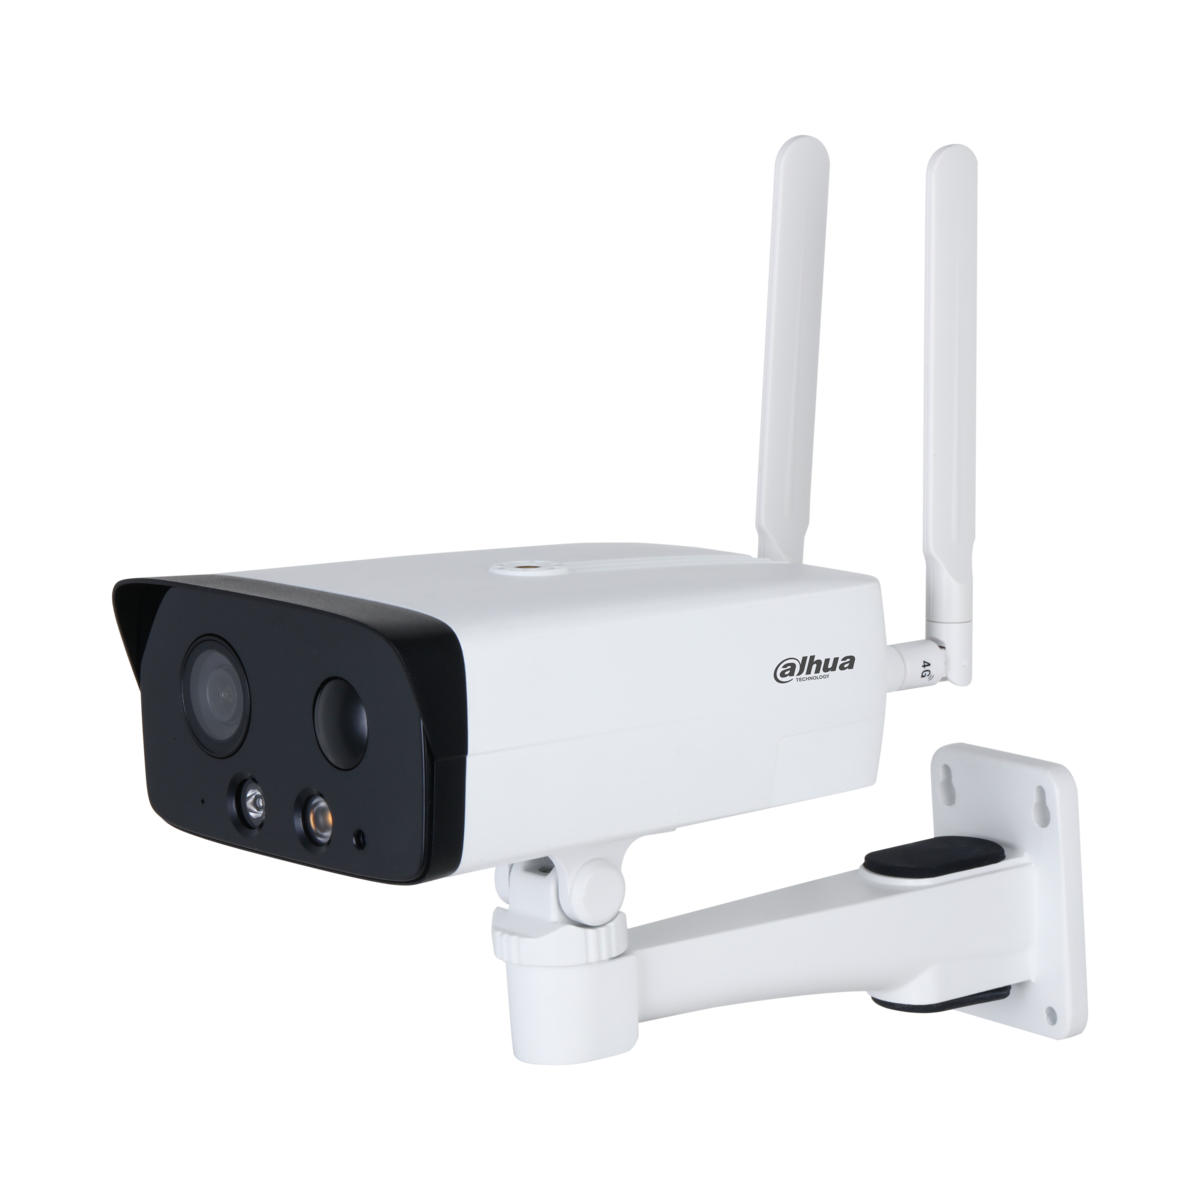 WIZSENSE SERIES IP CAMERA WHITE 4G 4MP H.264/4+/5/5+ BULLET 120 WDR PLASTIC/METAL 2.8MM FIXED LENS STARLIGHT IR+WHITE LED 30M IP67 BUILT IN MIC AUDIO IN AUDIO OUT 1 x ALARM IN 1 x ALARM OUT SUPPORT UP TO 256GB SD 12VDC